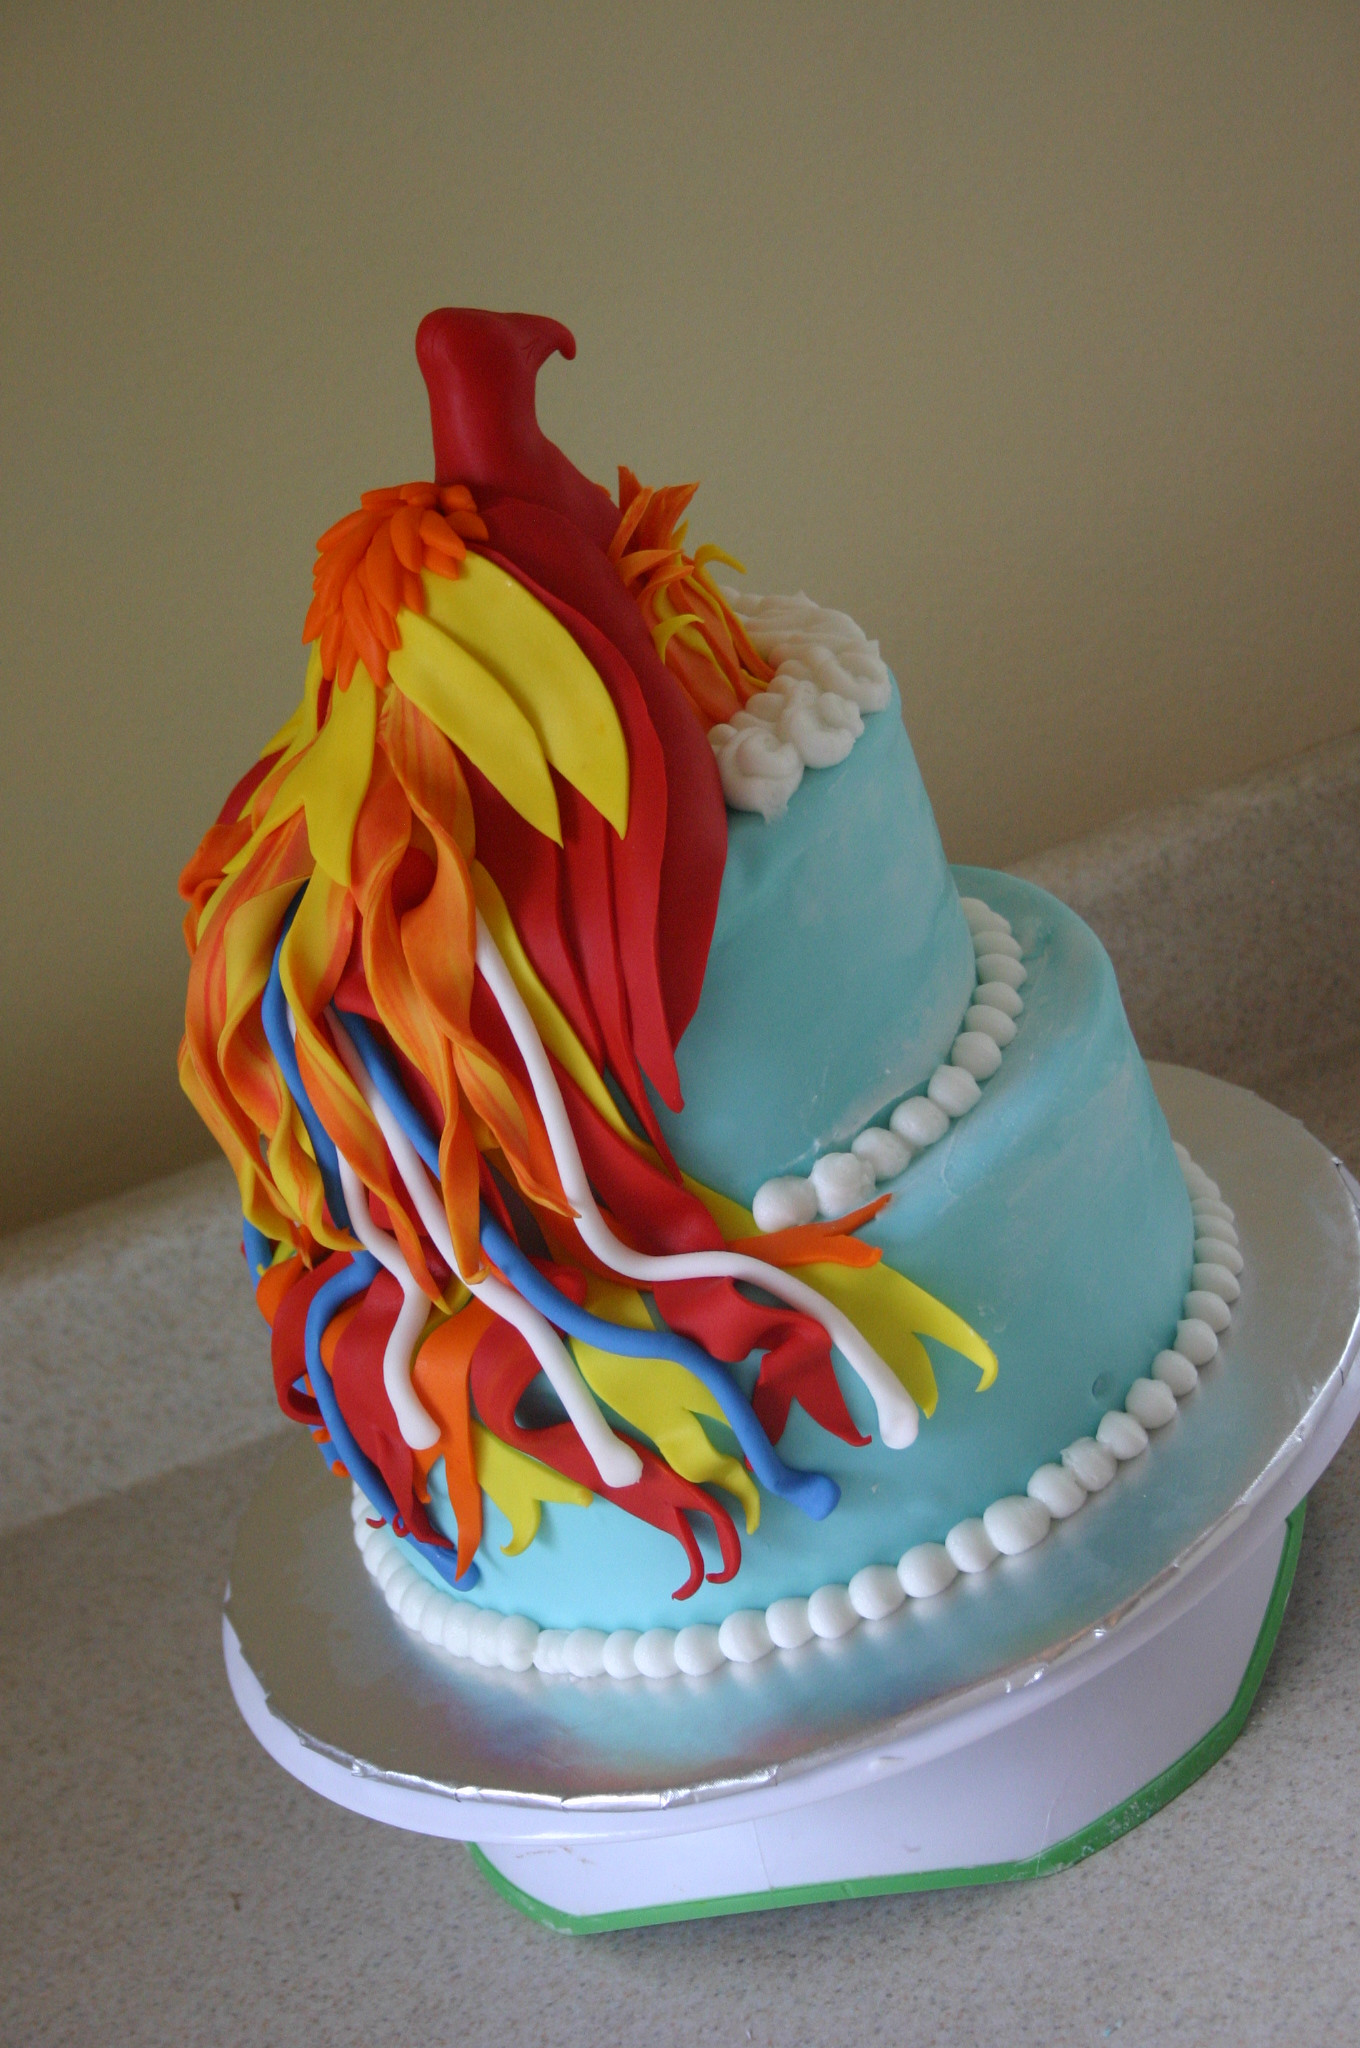 Picture Of Birthday Cake
 fawkes phoenix cake